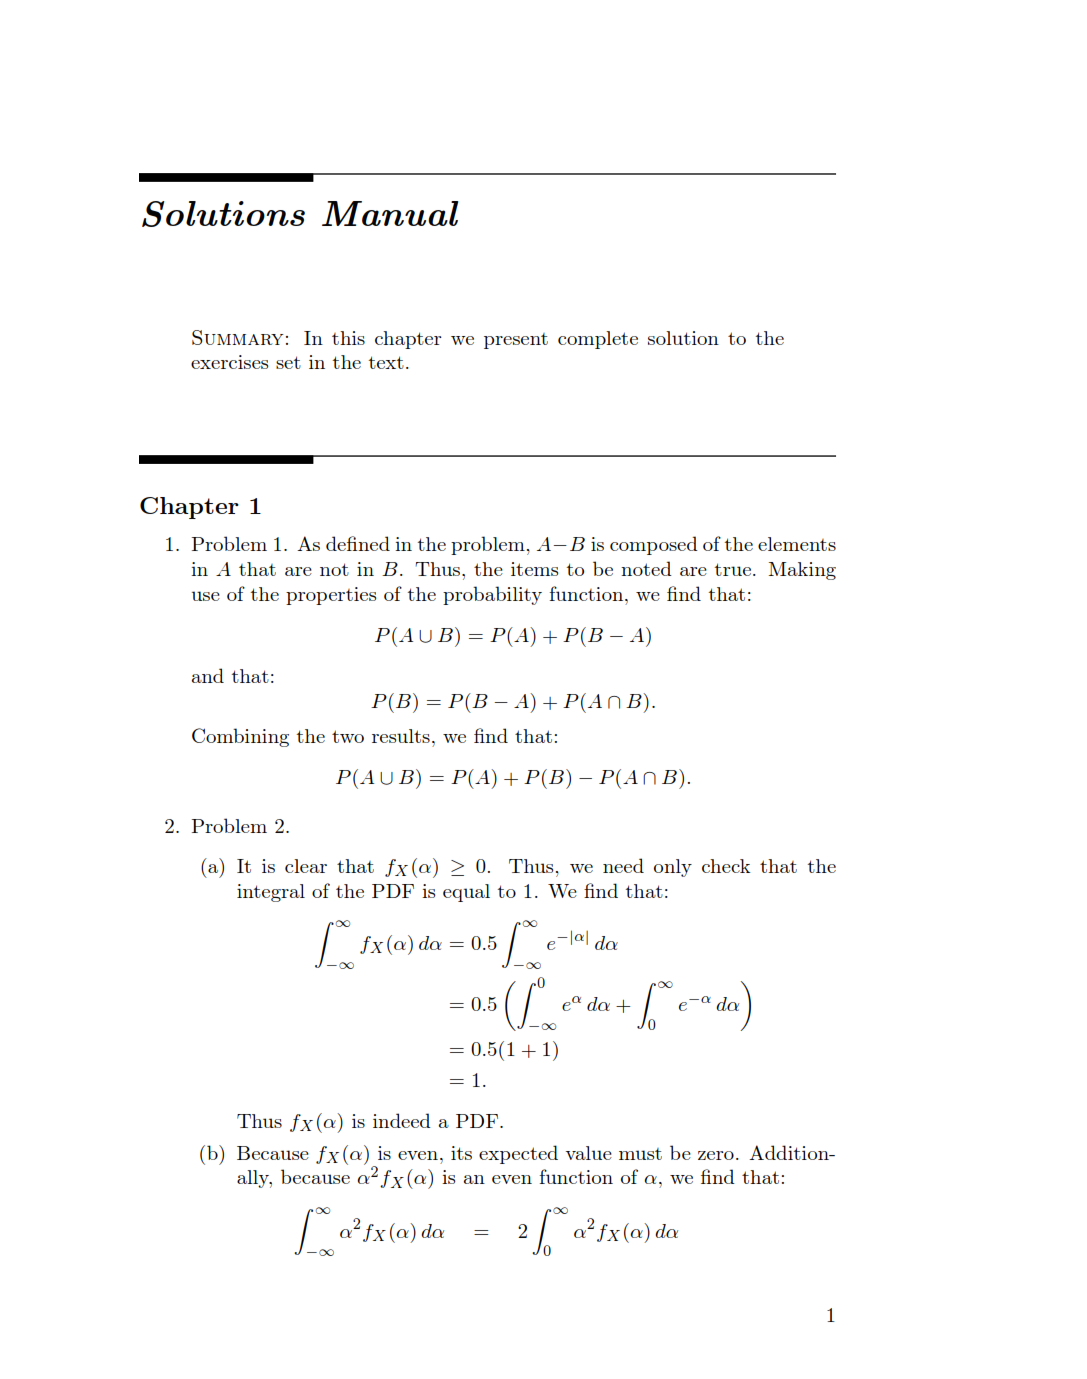 download free Random Signals and Noise A Mathematical Introduction by Shlomo Engelberg solutions manual pdf | Gioumeh solution